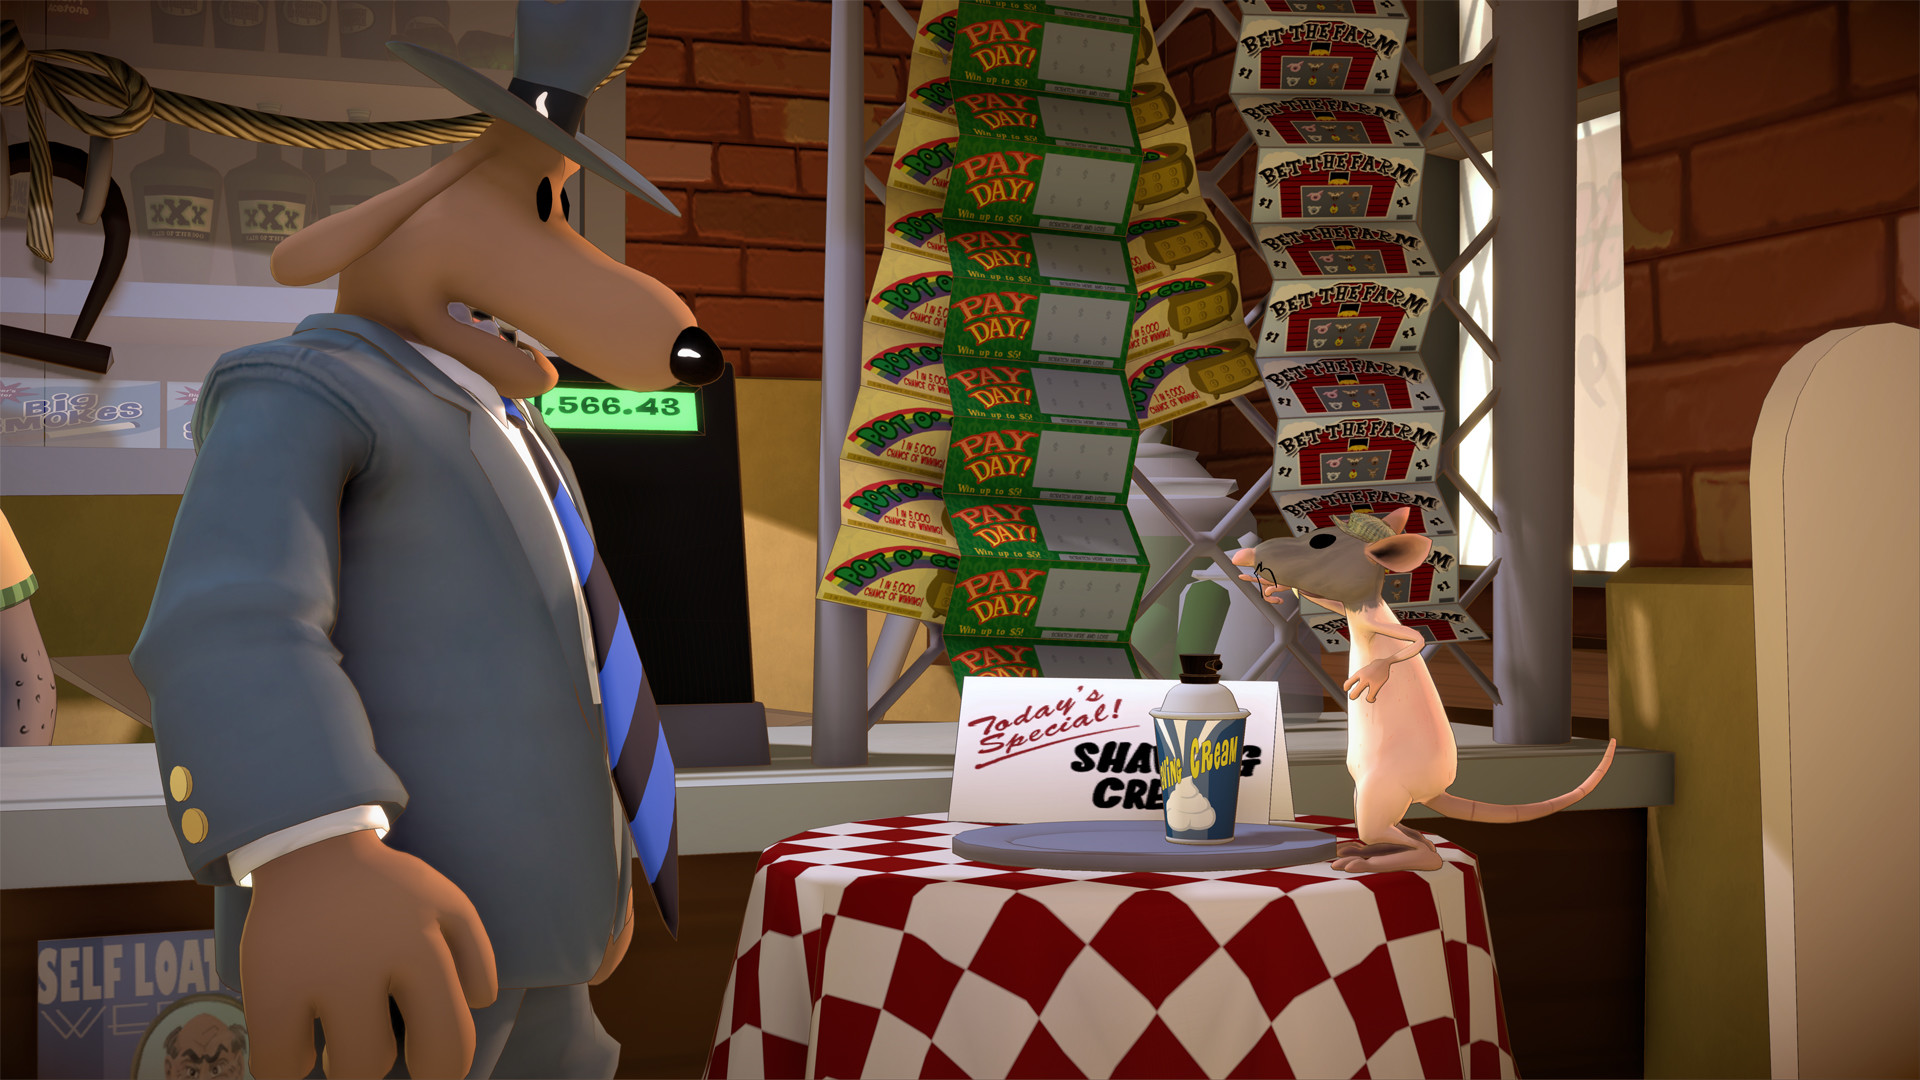 Sam and Max Save the World